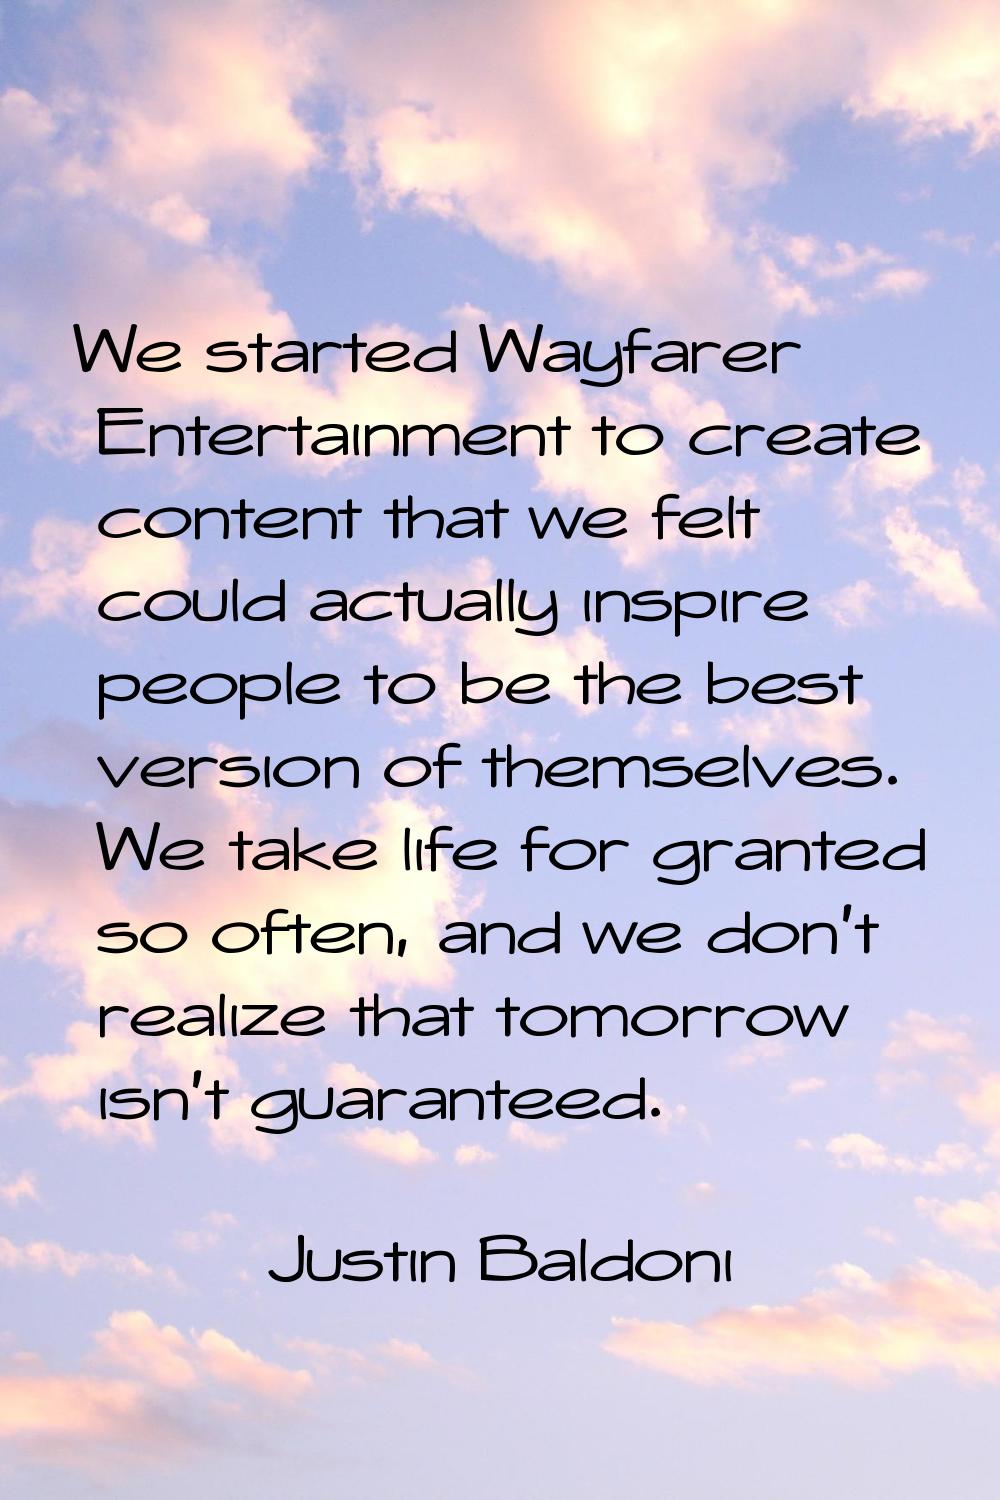 We started Wayfarer Entertainment to create content that we felt could actually inspire people to b